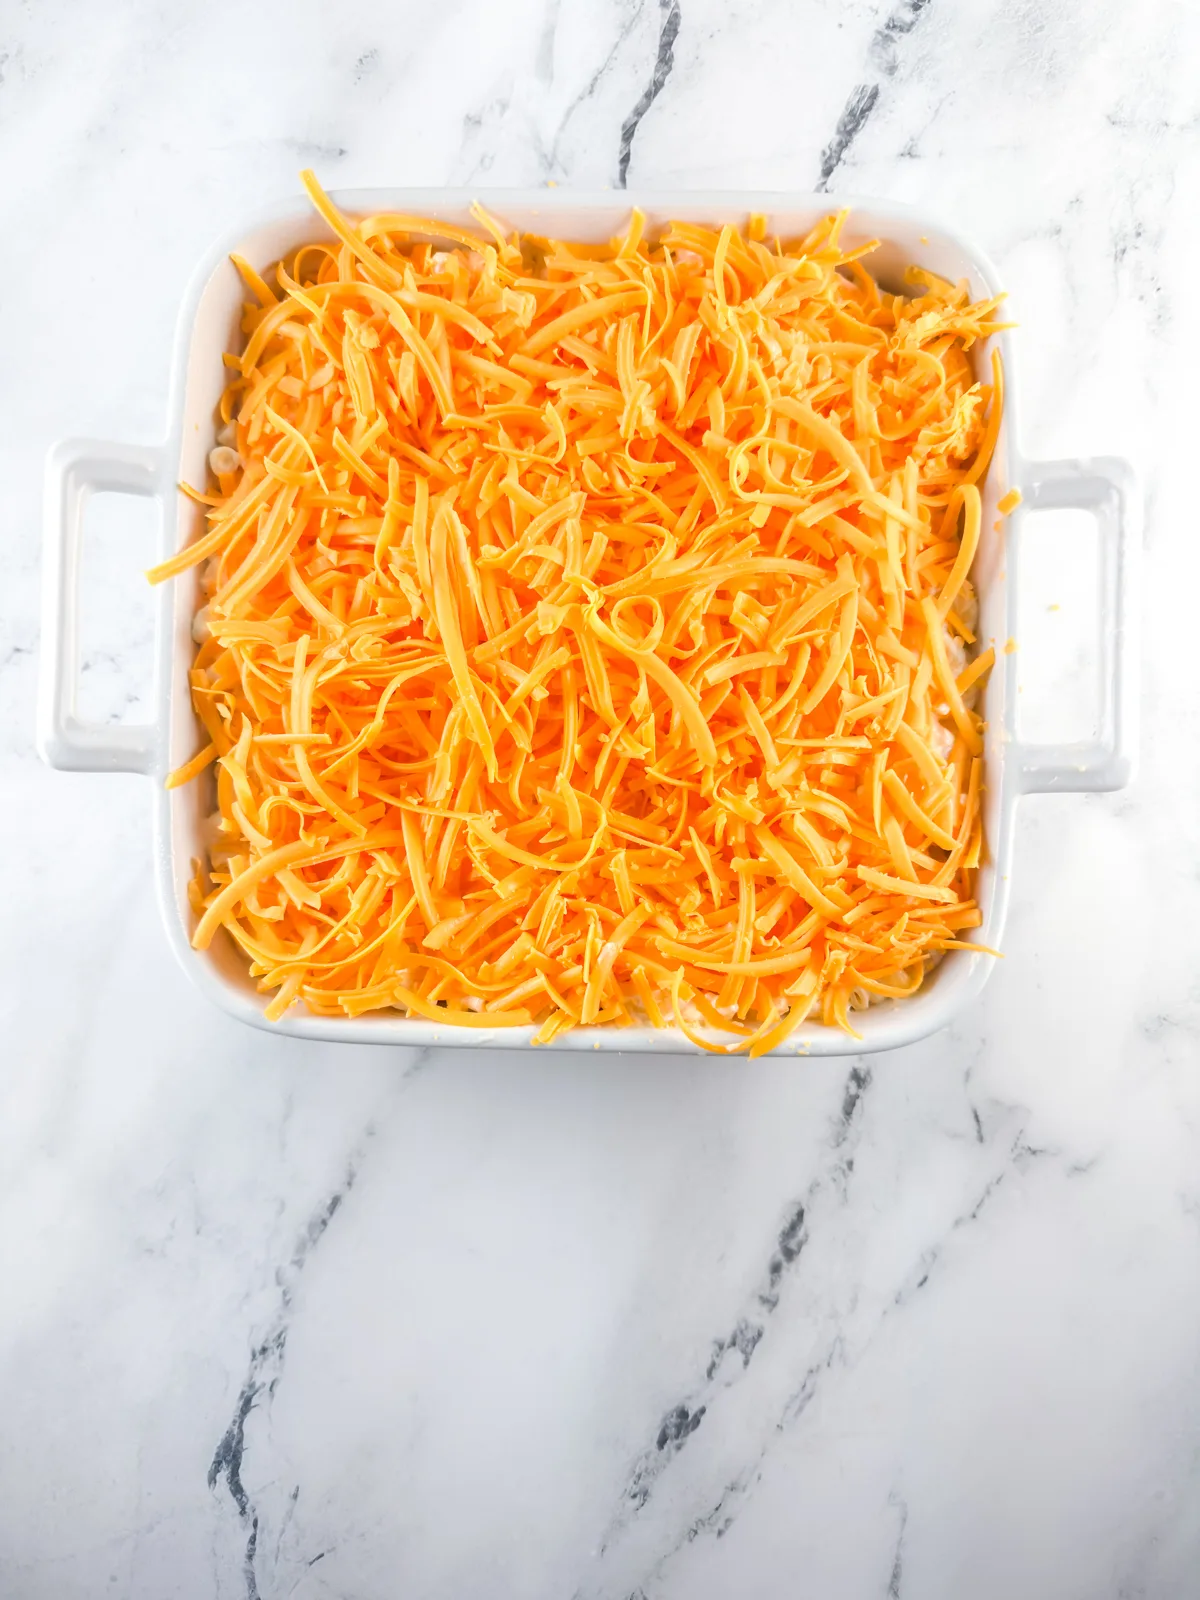 Unbaked macaroni and cheese covered with a layer of shredded cheddar before baking.